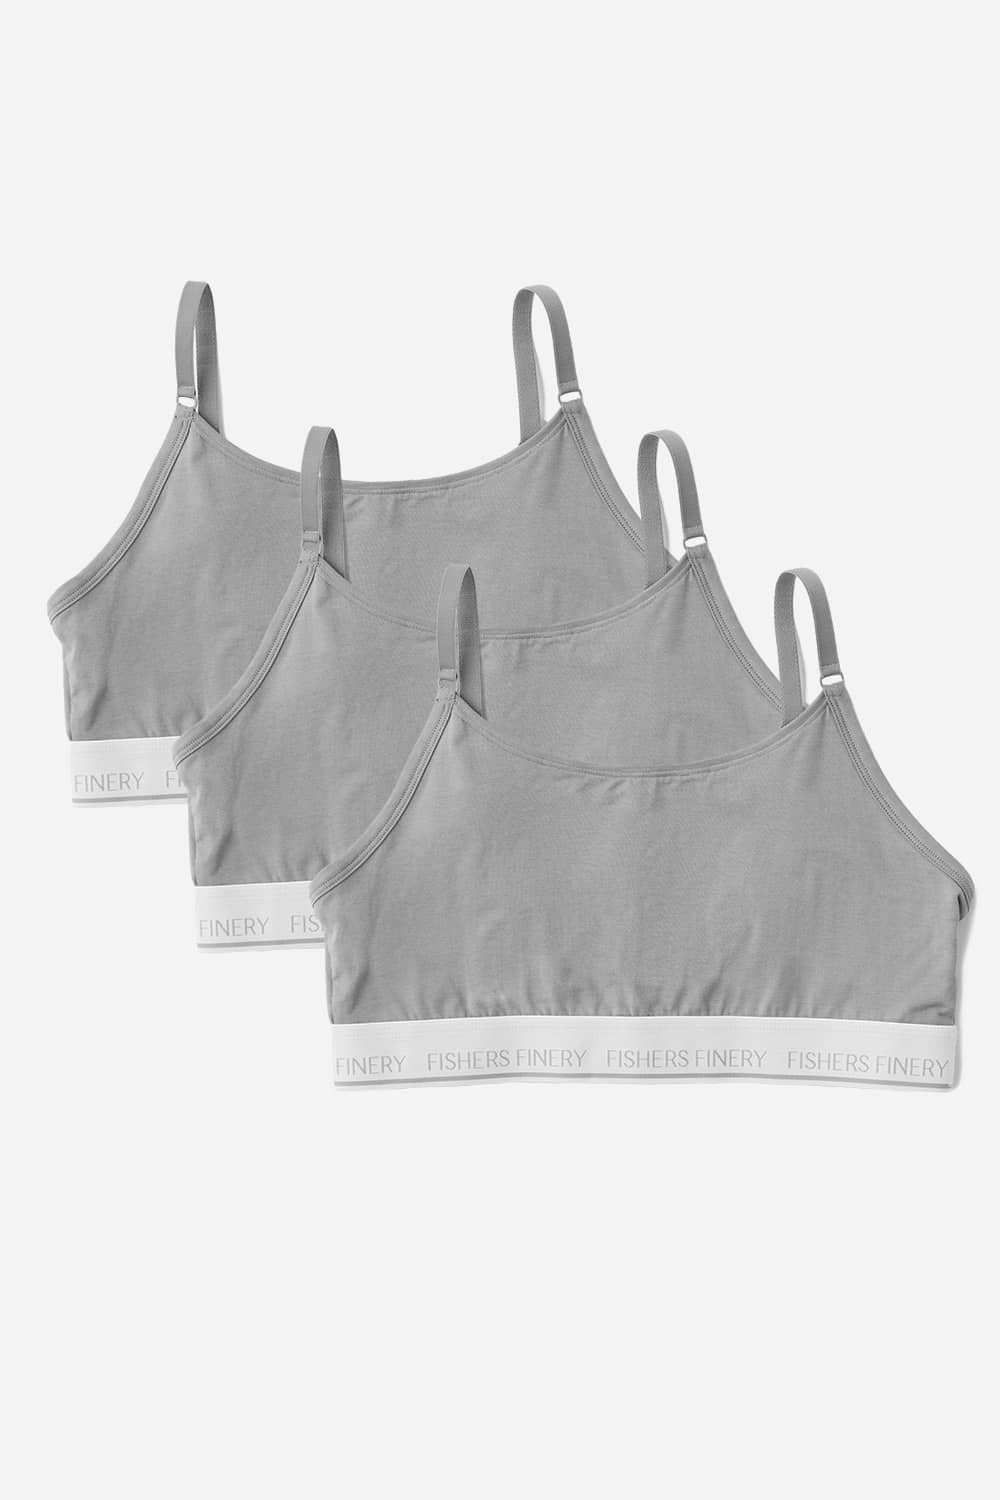 Women's Everyday Lightweight Adjustable Bralette Womens>Casual>Bra Fishers Finery Sky Gray X-Small 3 Pack